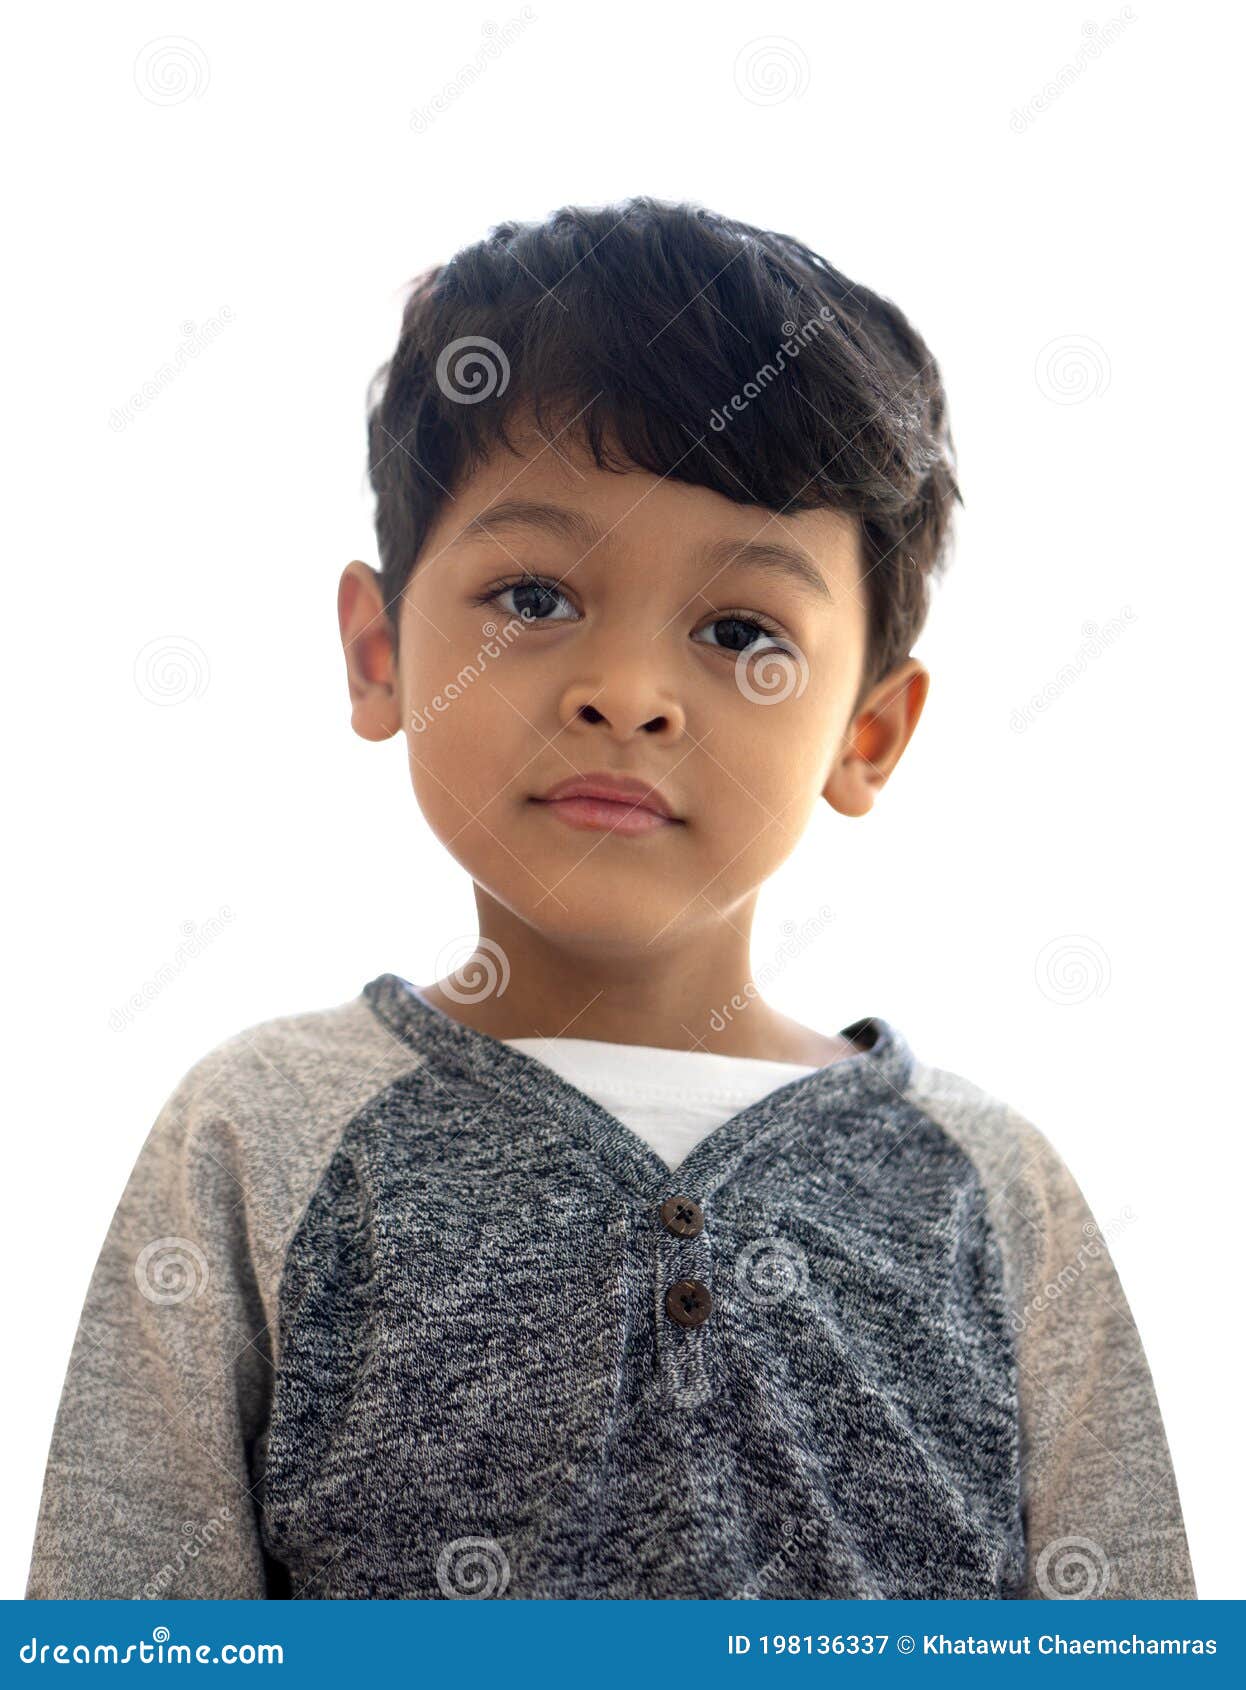 Half photo of an Asian boy stock image. Image of person - 198136337